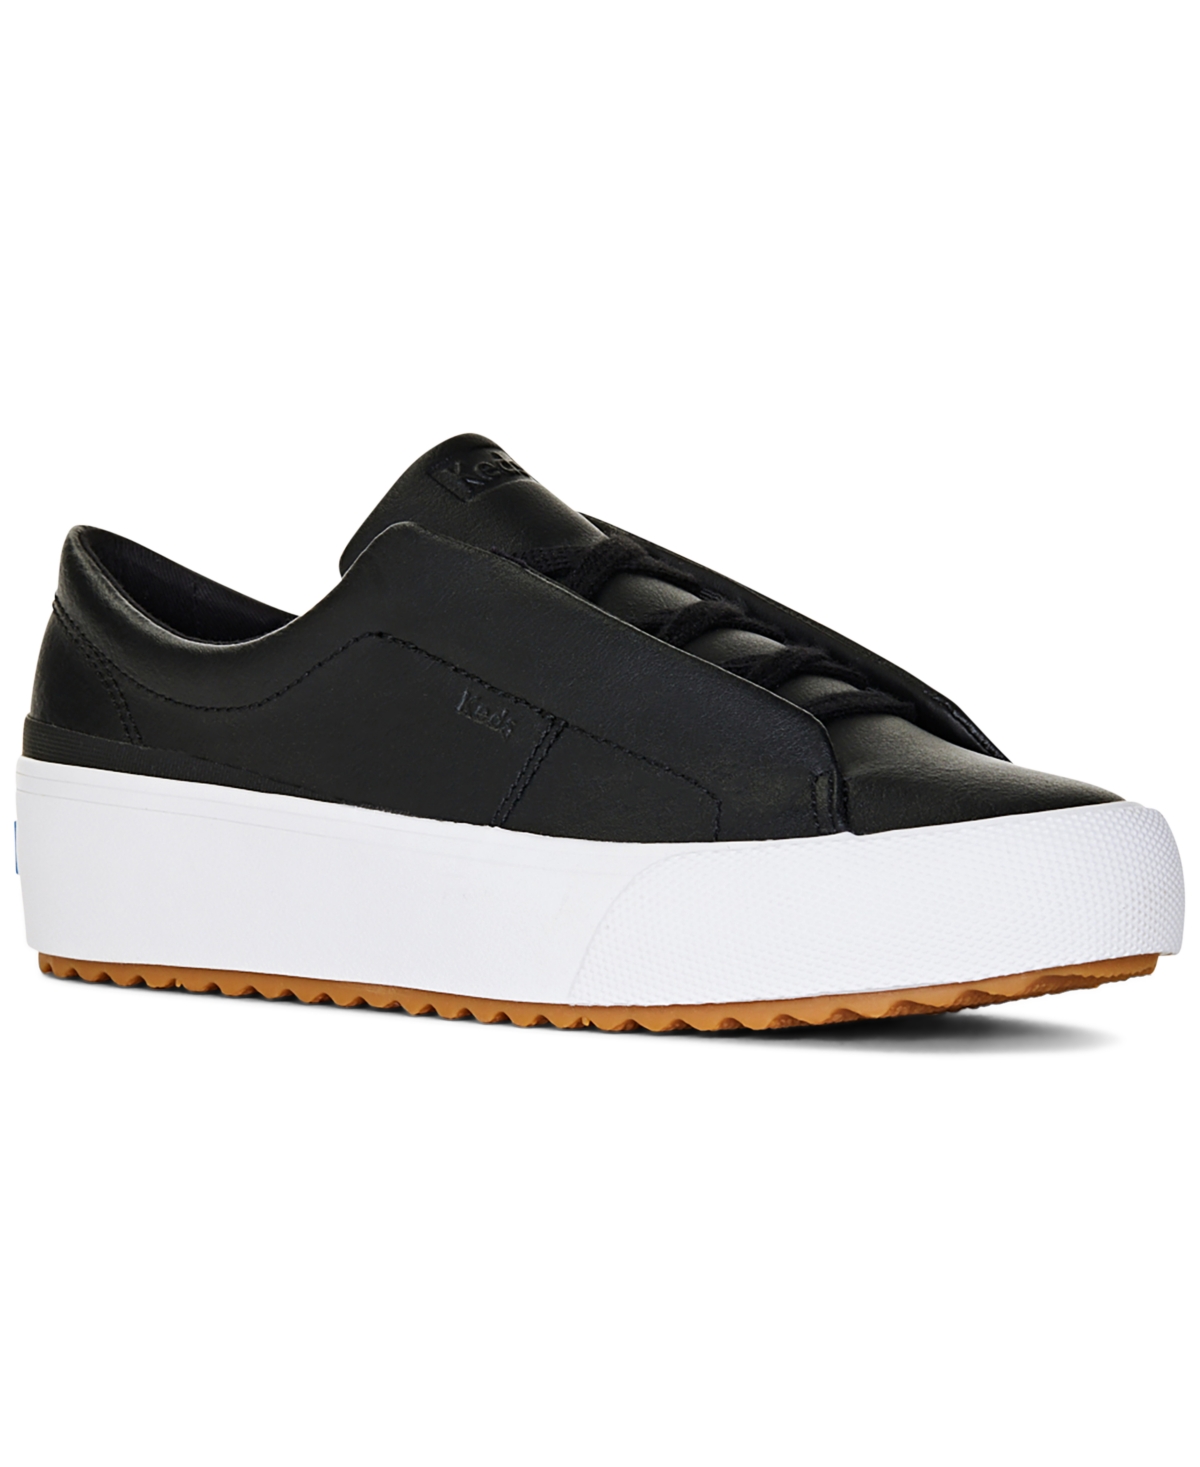 Women's Remi Leather Casual Sneakers from Finish Line - Black